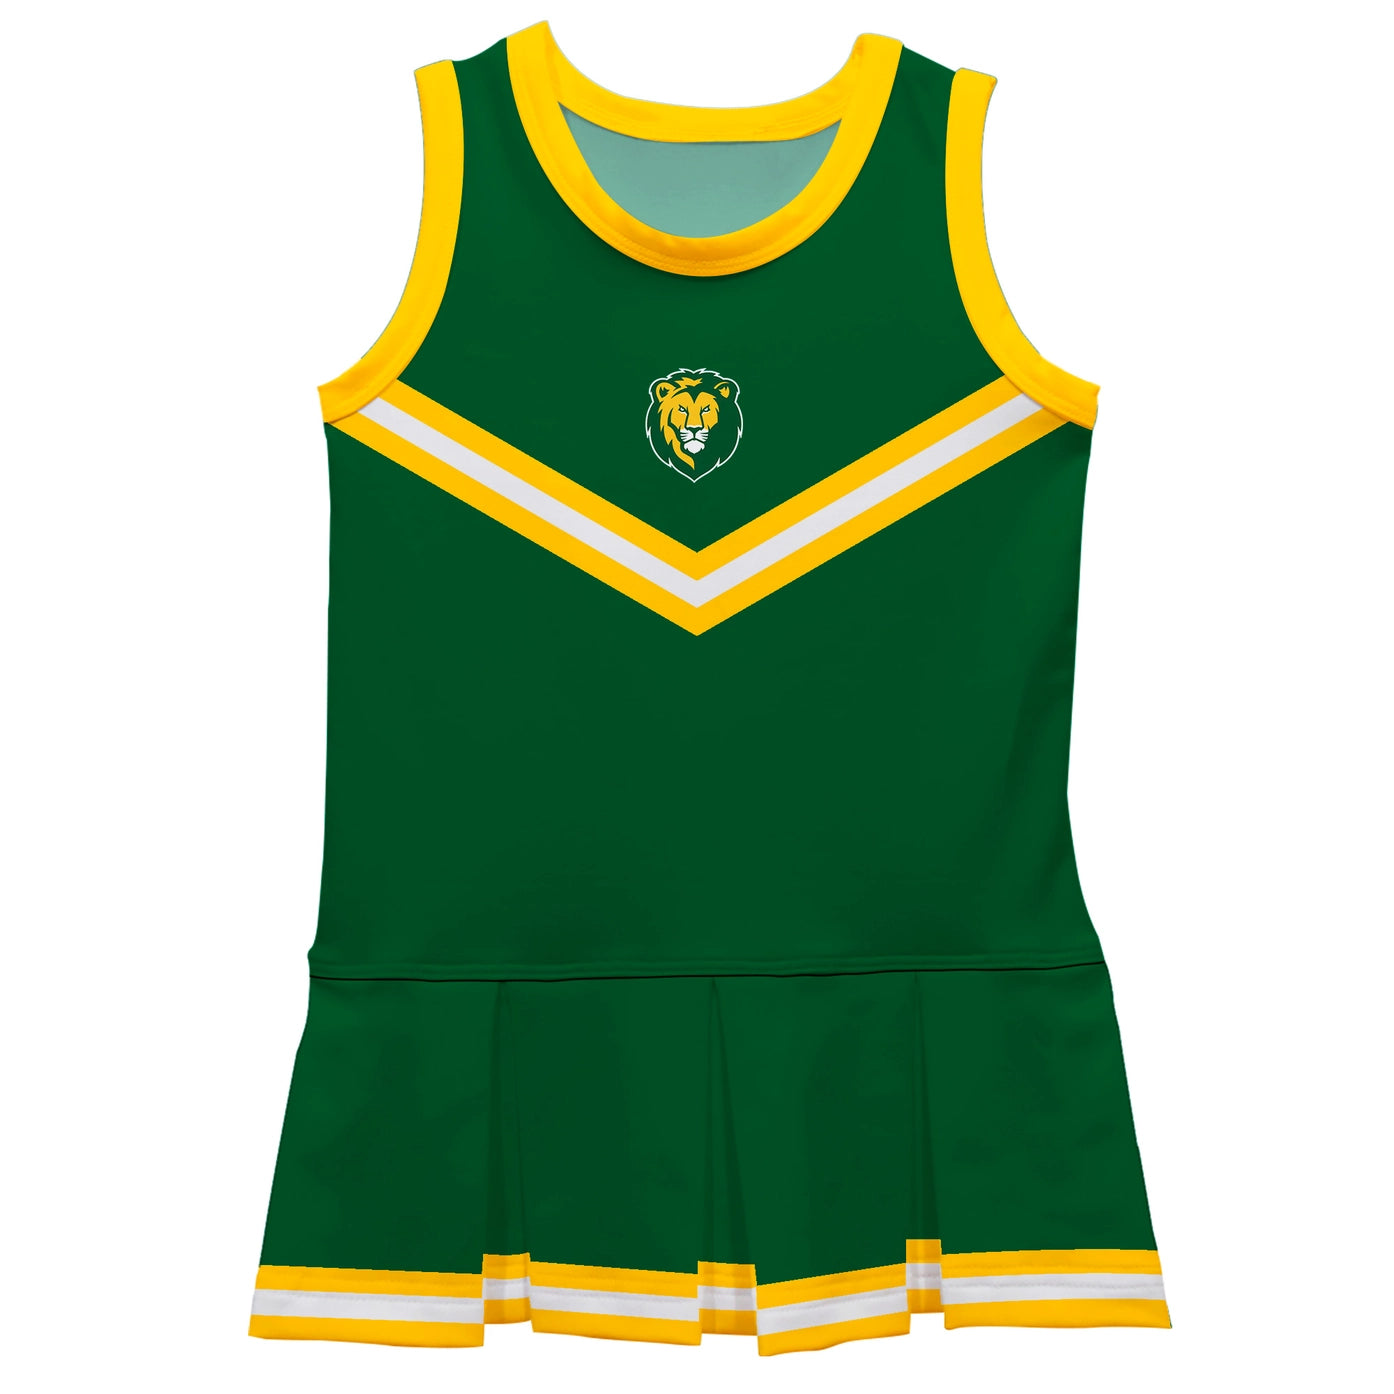 A Vive La Fete Southeastern Lions Cheer Set, featuring a green and yellow cheerleader dress.